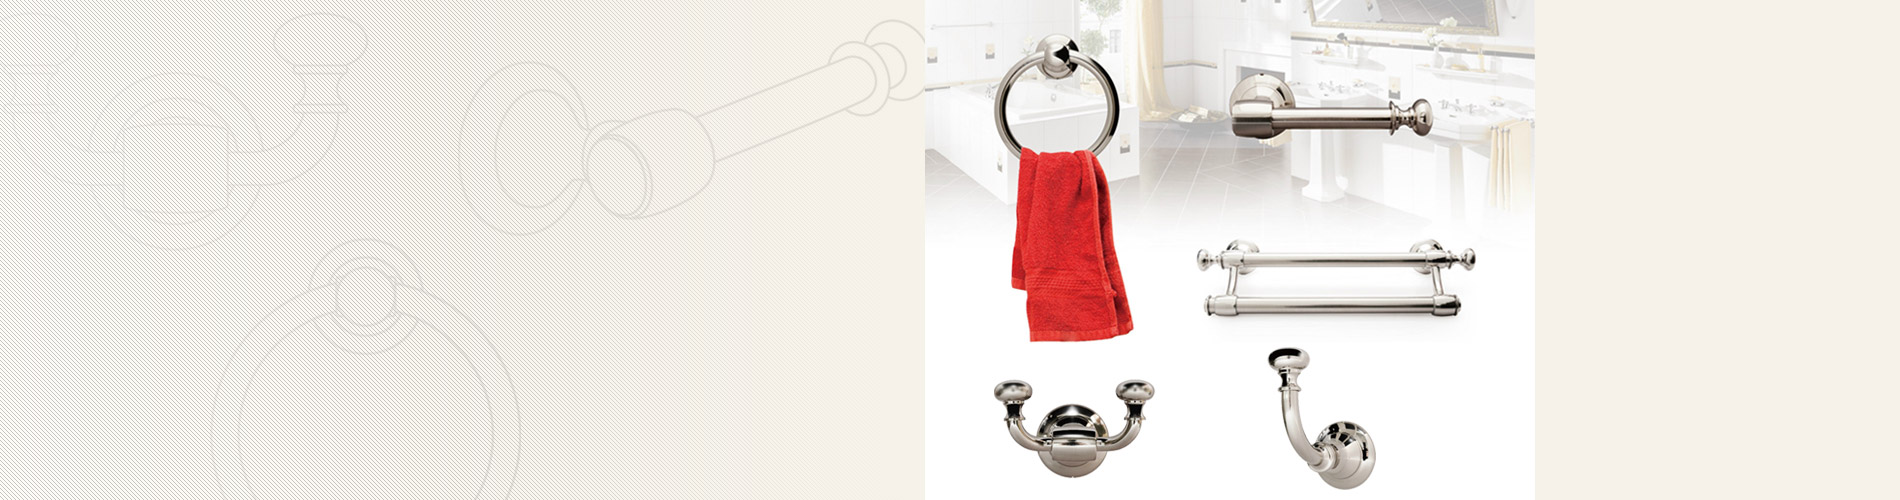 Bathroom Hardware Our bathroom hardware contains single/double towel rack,  towel ring, tissue holder and garment hooks.